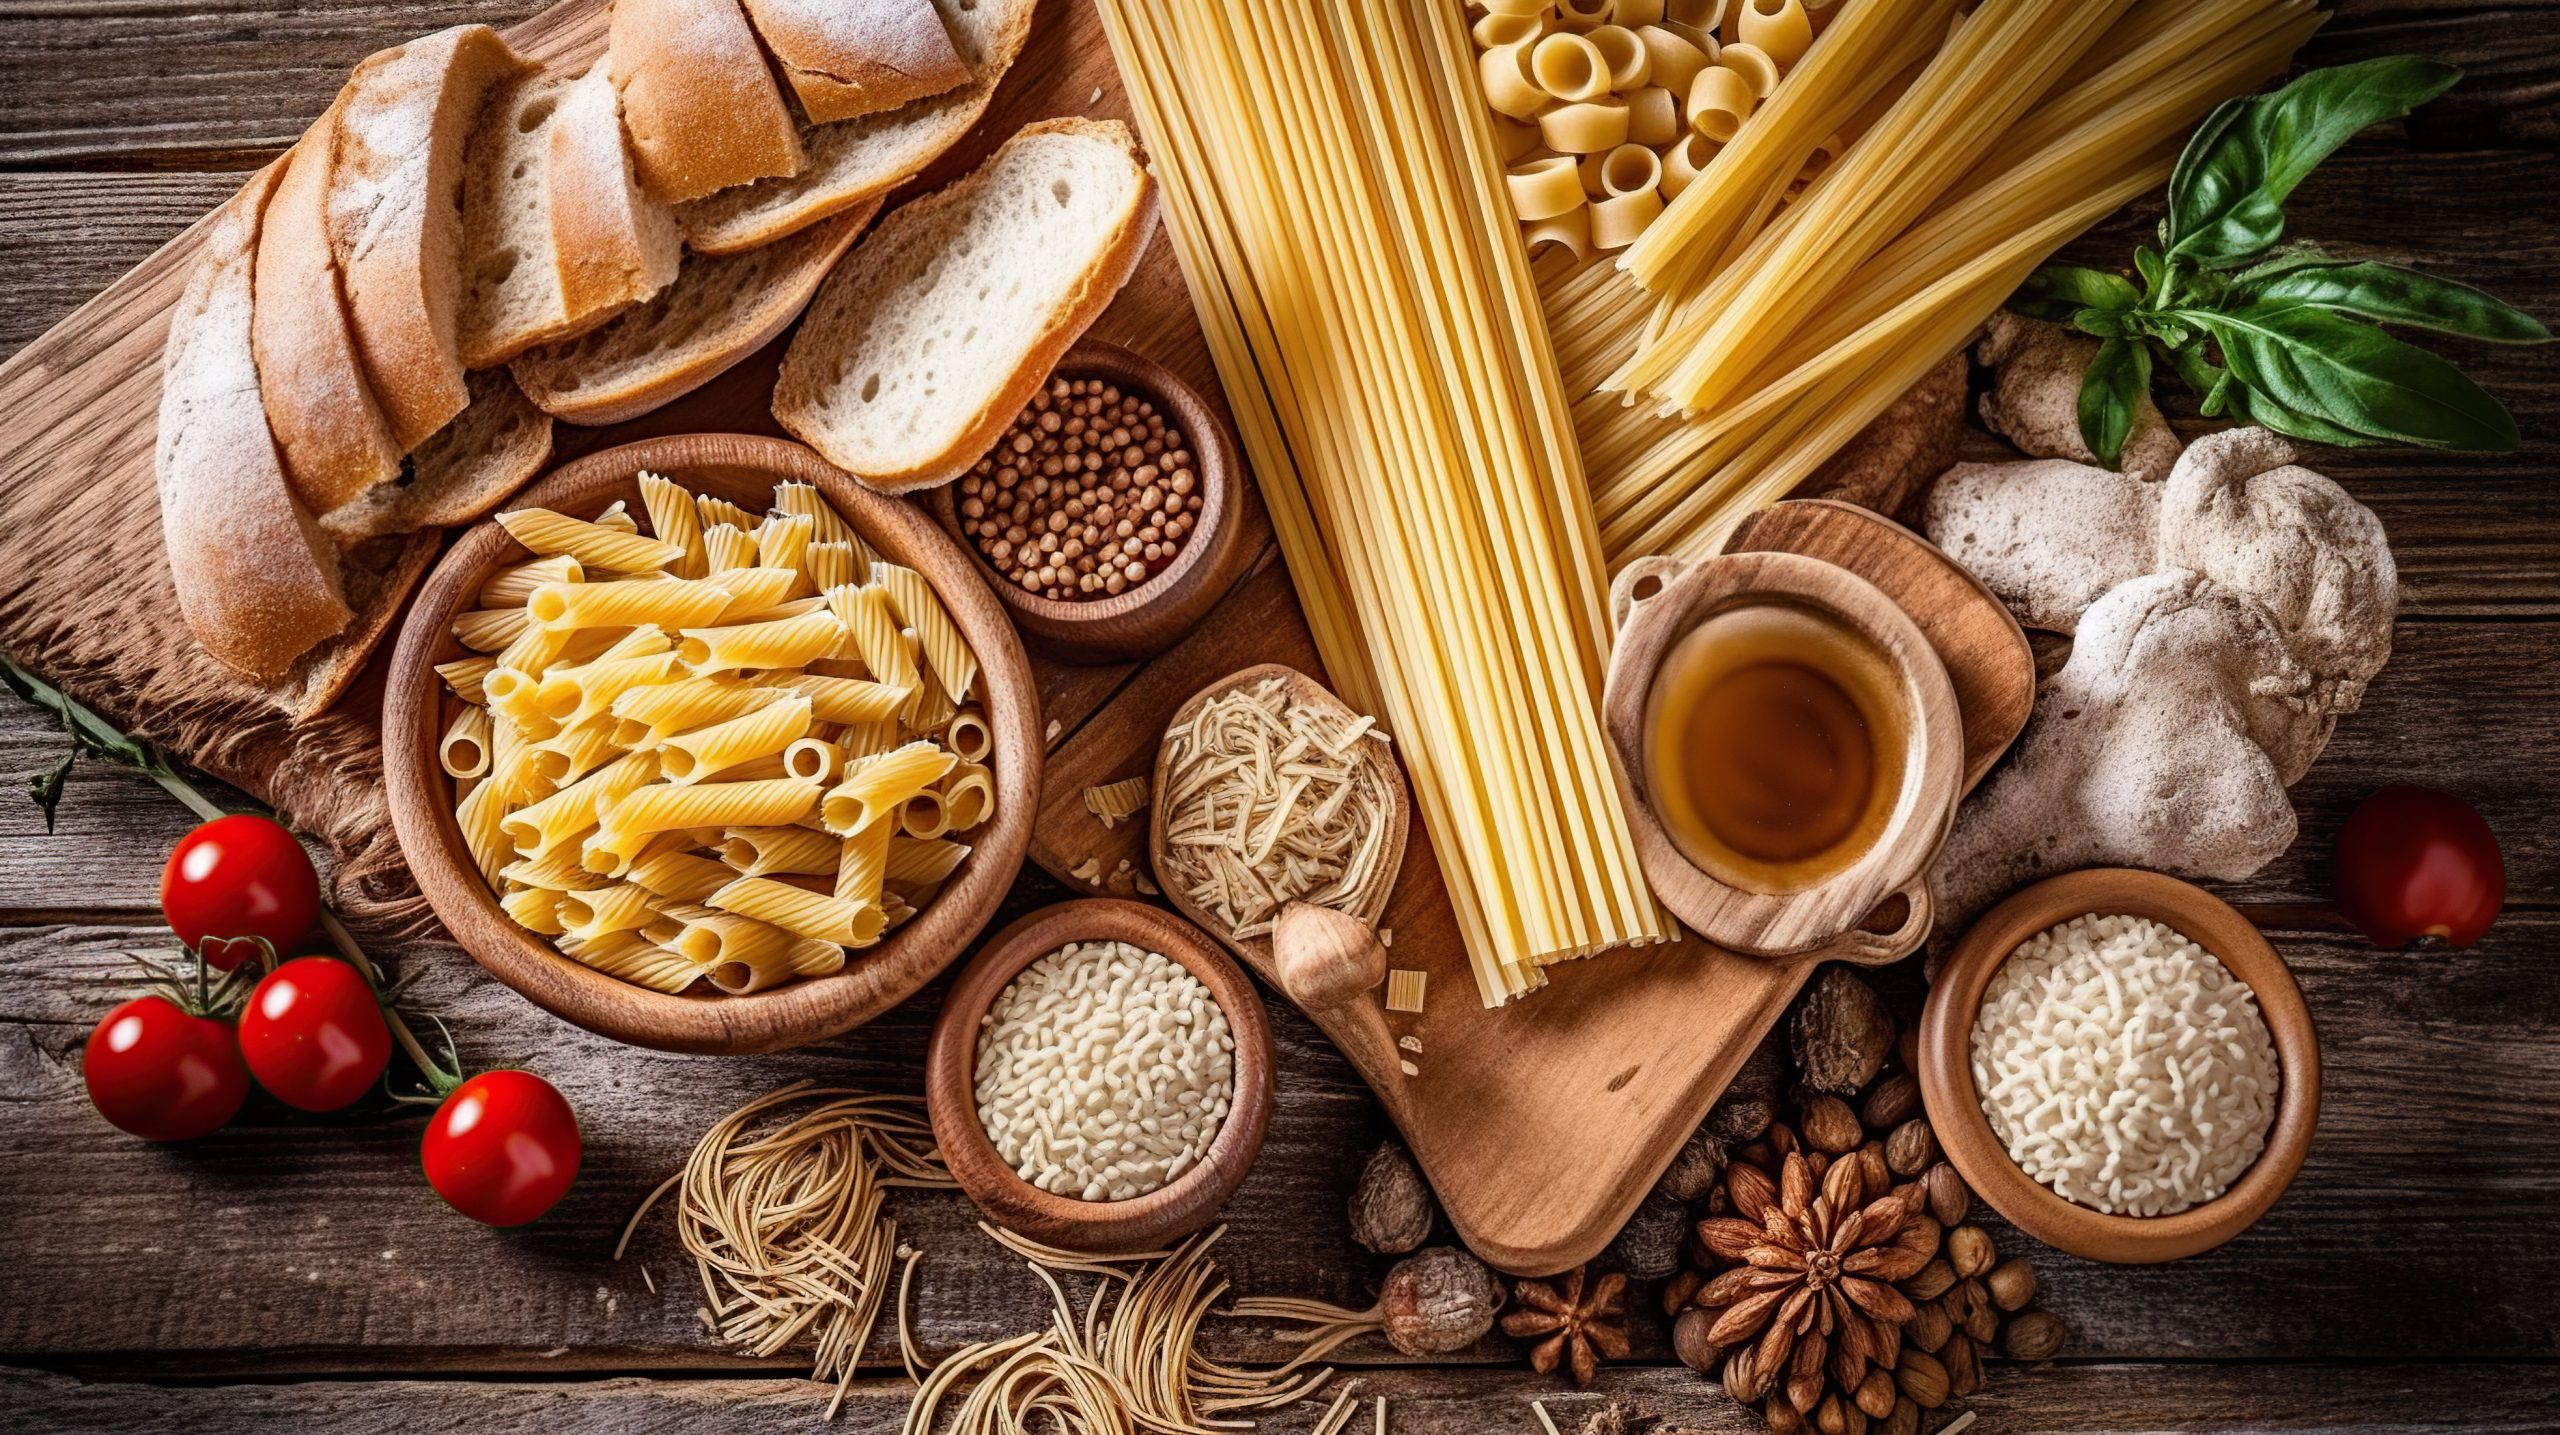 bread and pasta ingredients